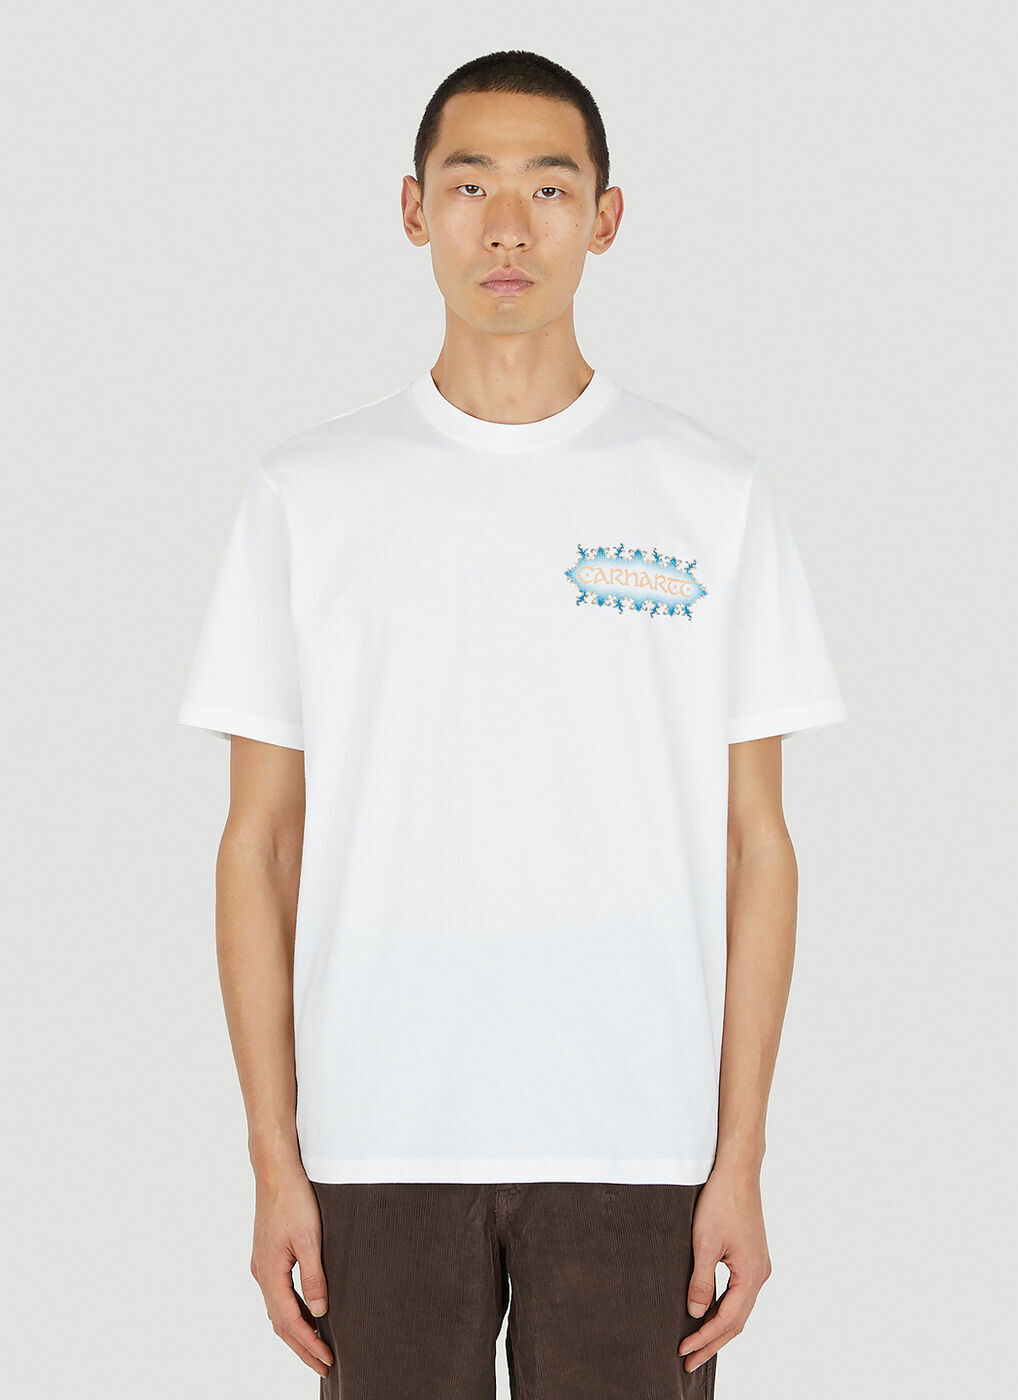 Spaces T-Shirt in White Carhartt WIP